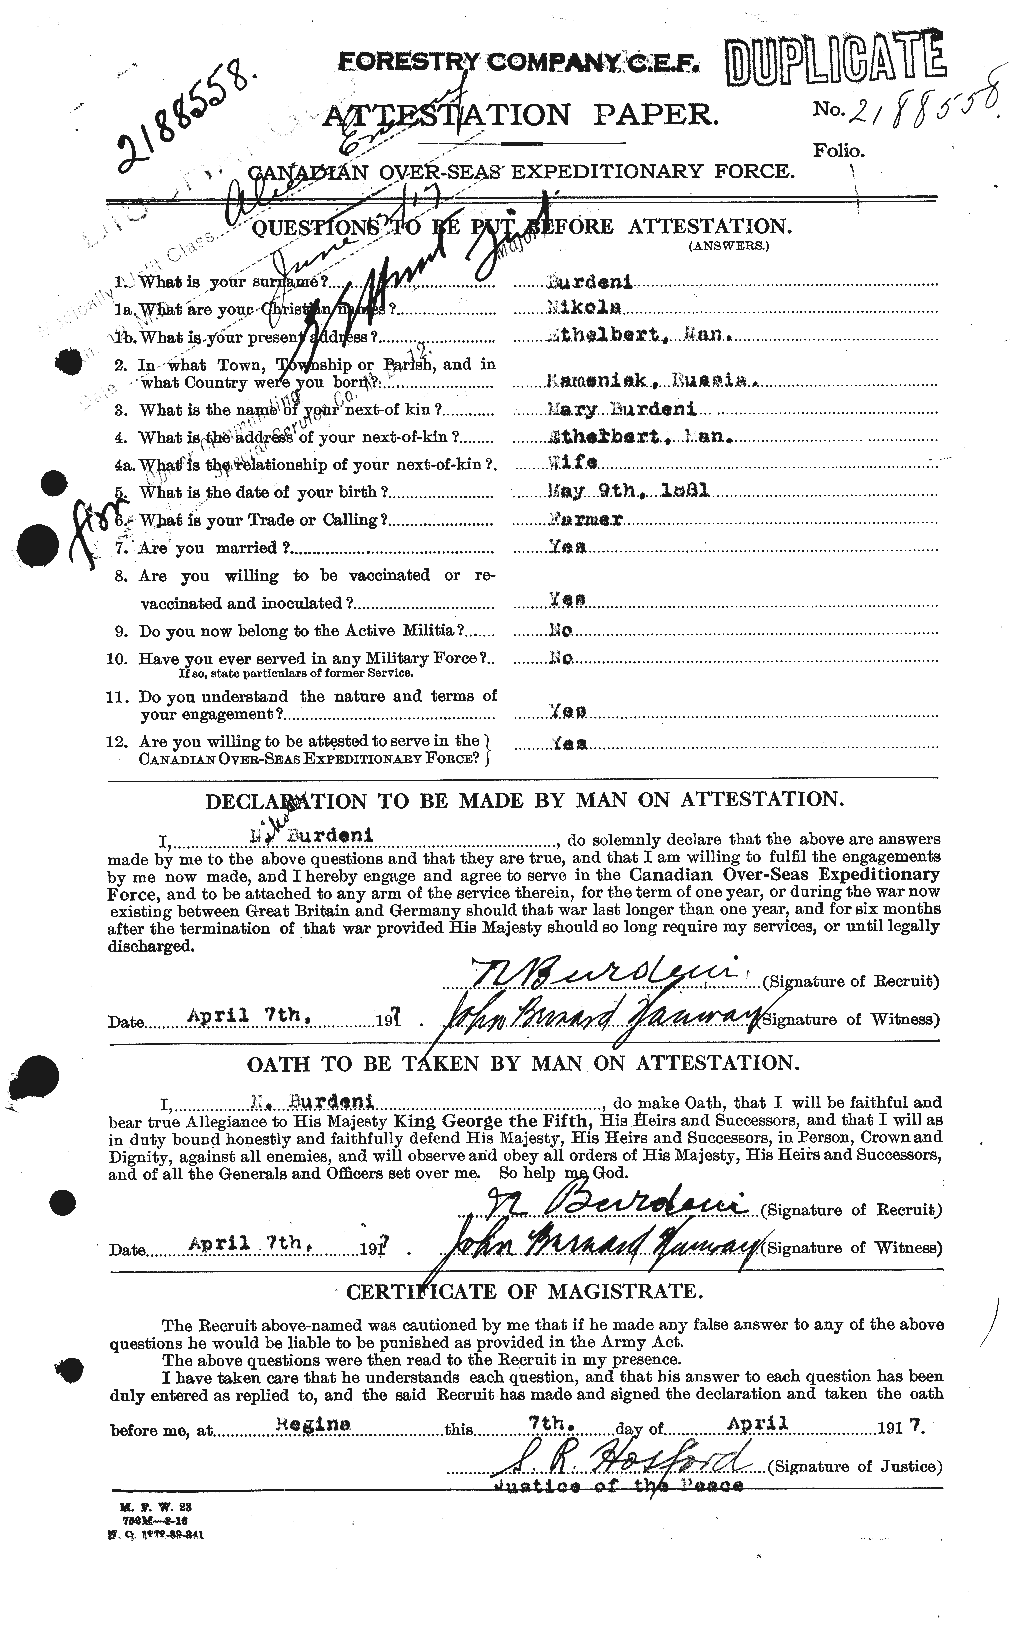 Personnel Records of the First World War - CEF 273276a